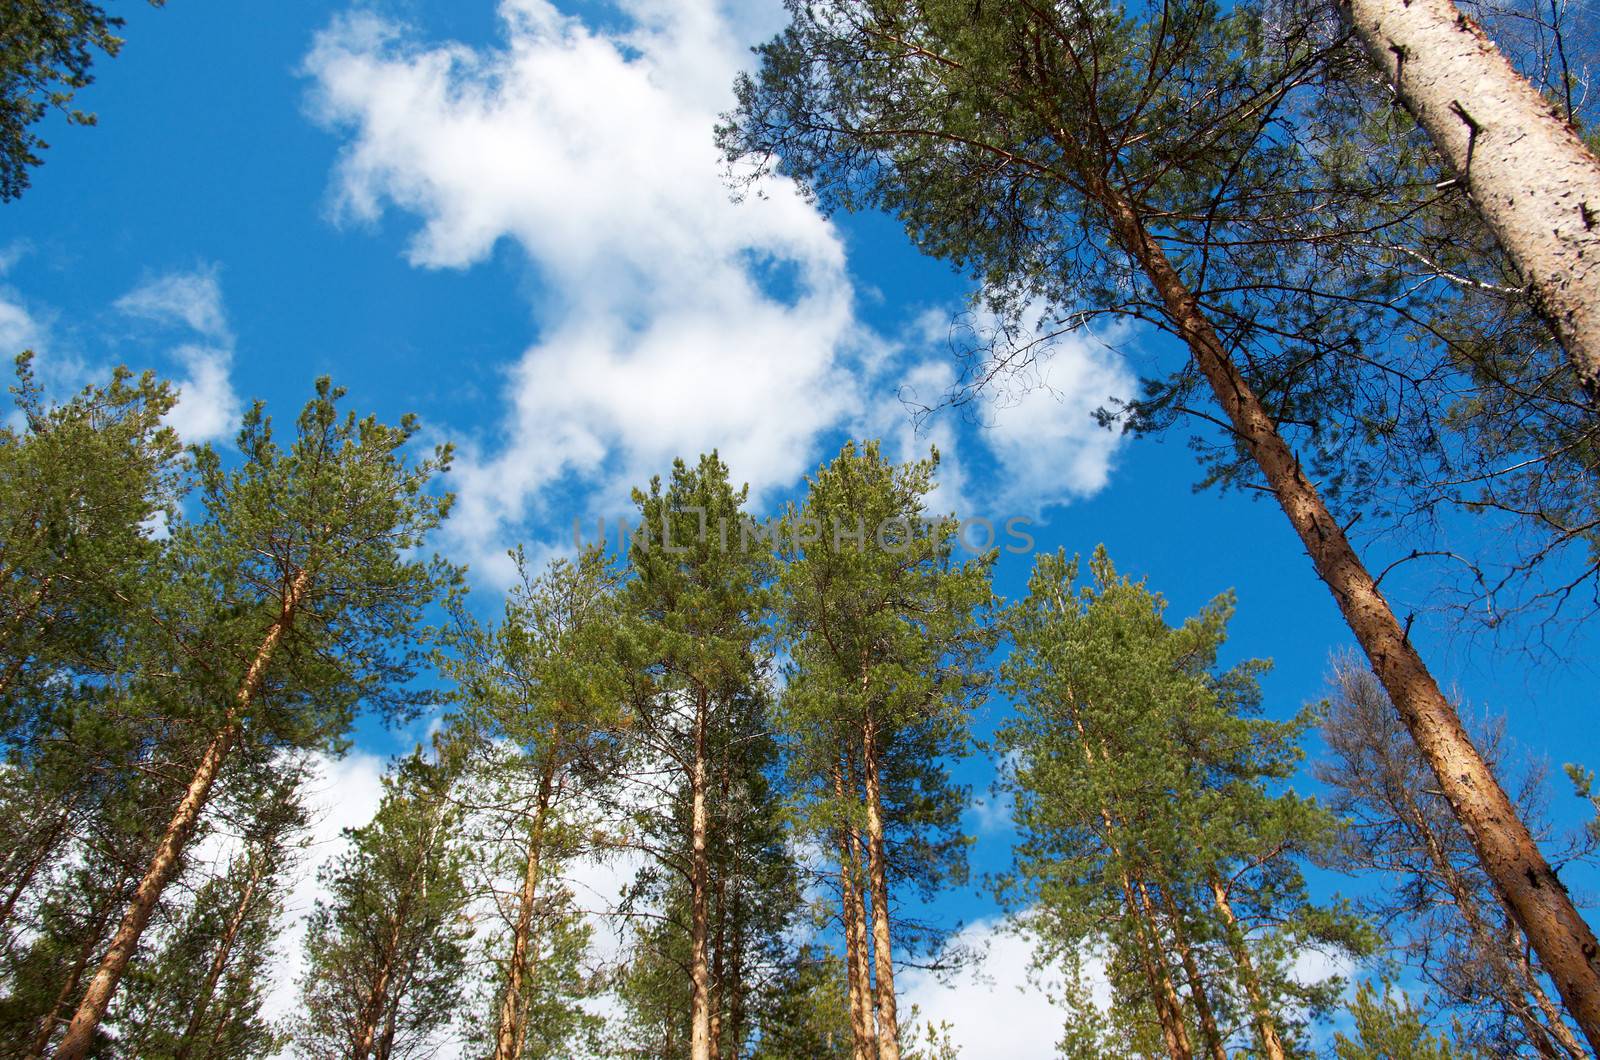 pine forest under cloudy blue sky